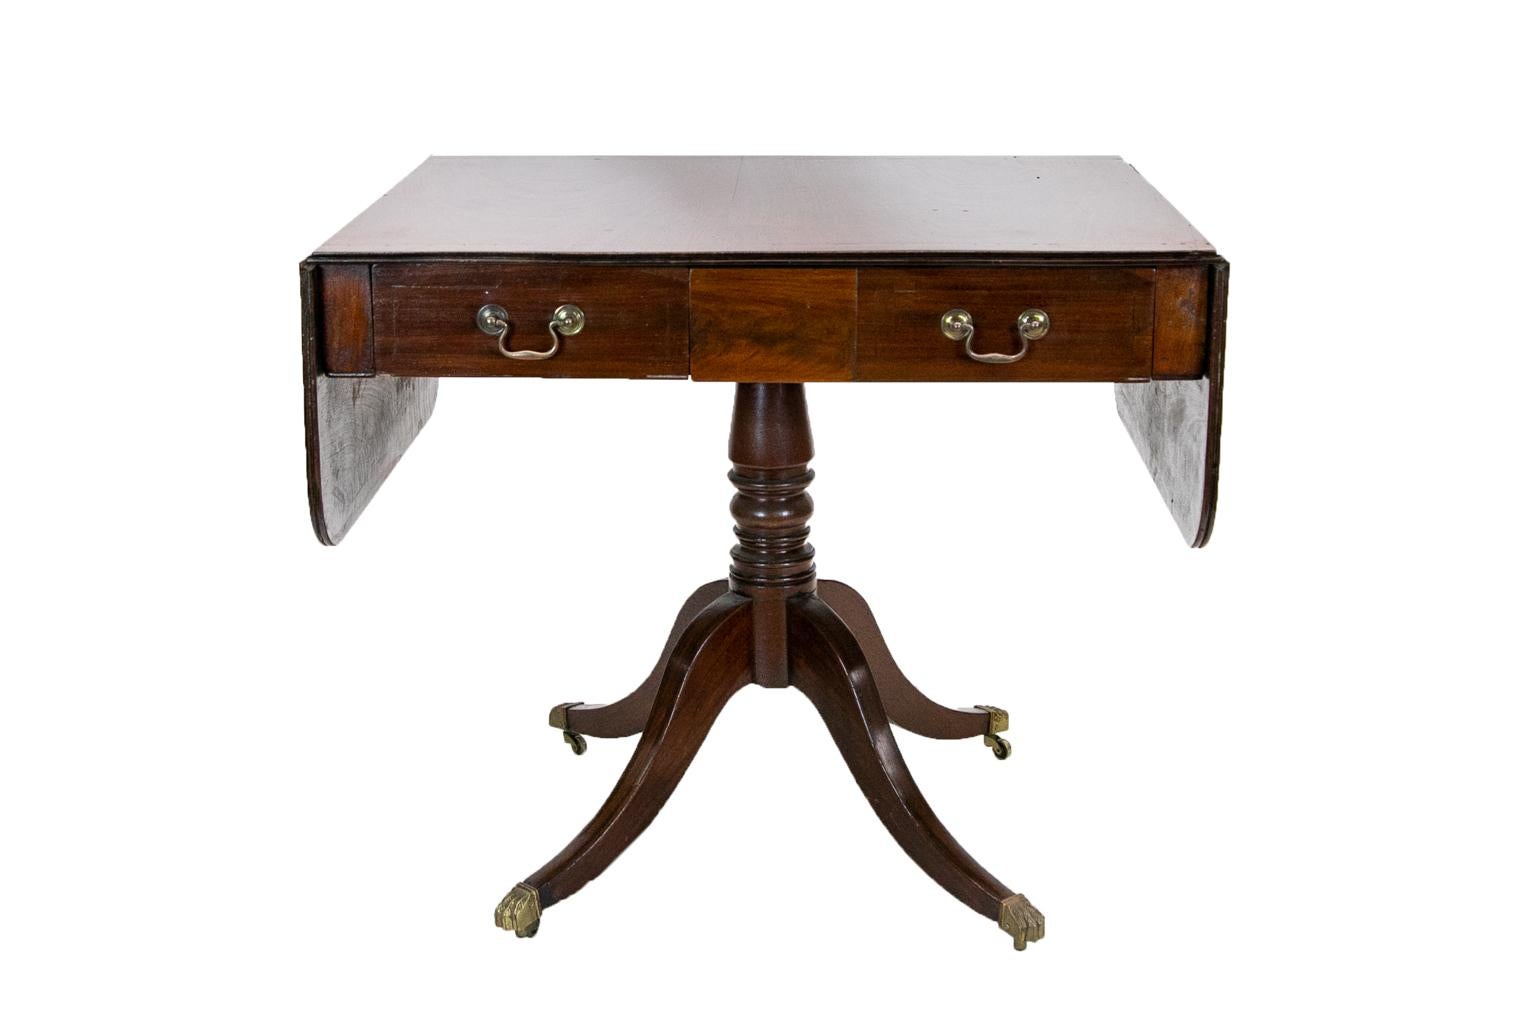 The top of this sofa table has an inlaid band. The drop leaves are supported by double extending butterfly supports. The base has a turned stem and is supported by four inlaid sweeping legs that terminate in brass hairy paw castors. It is 56.75''